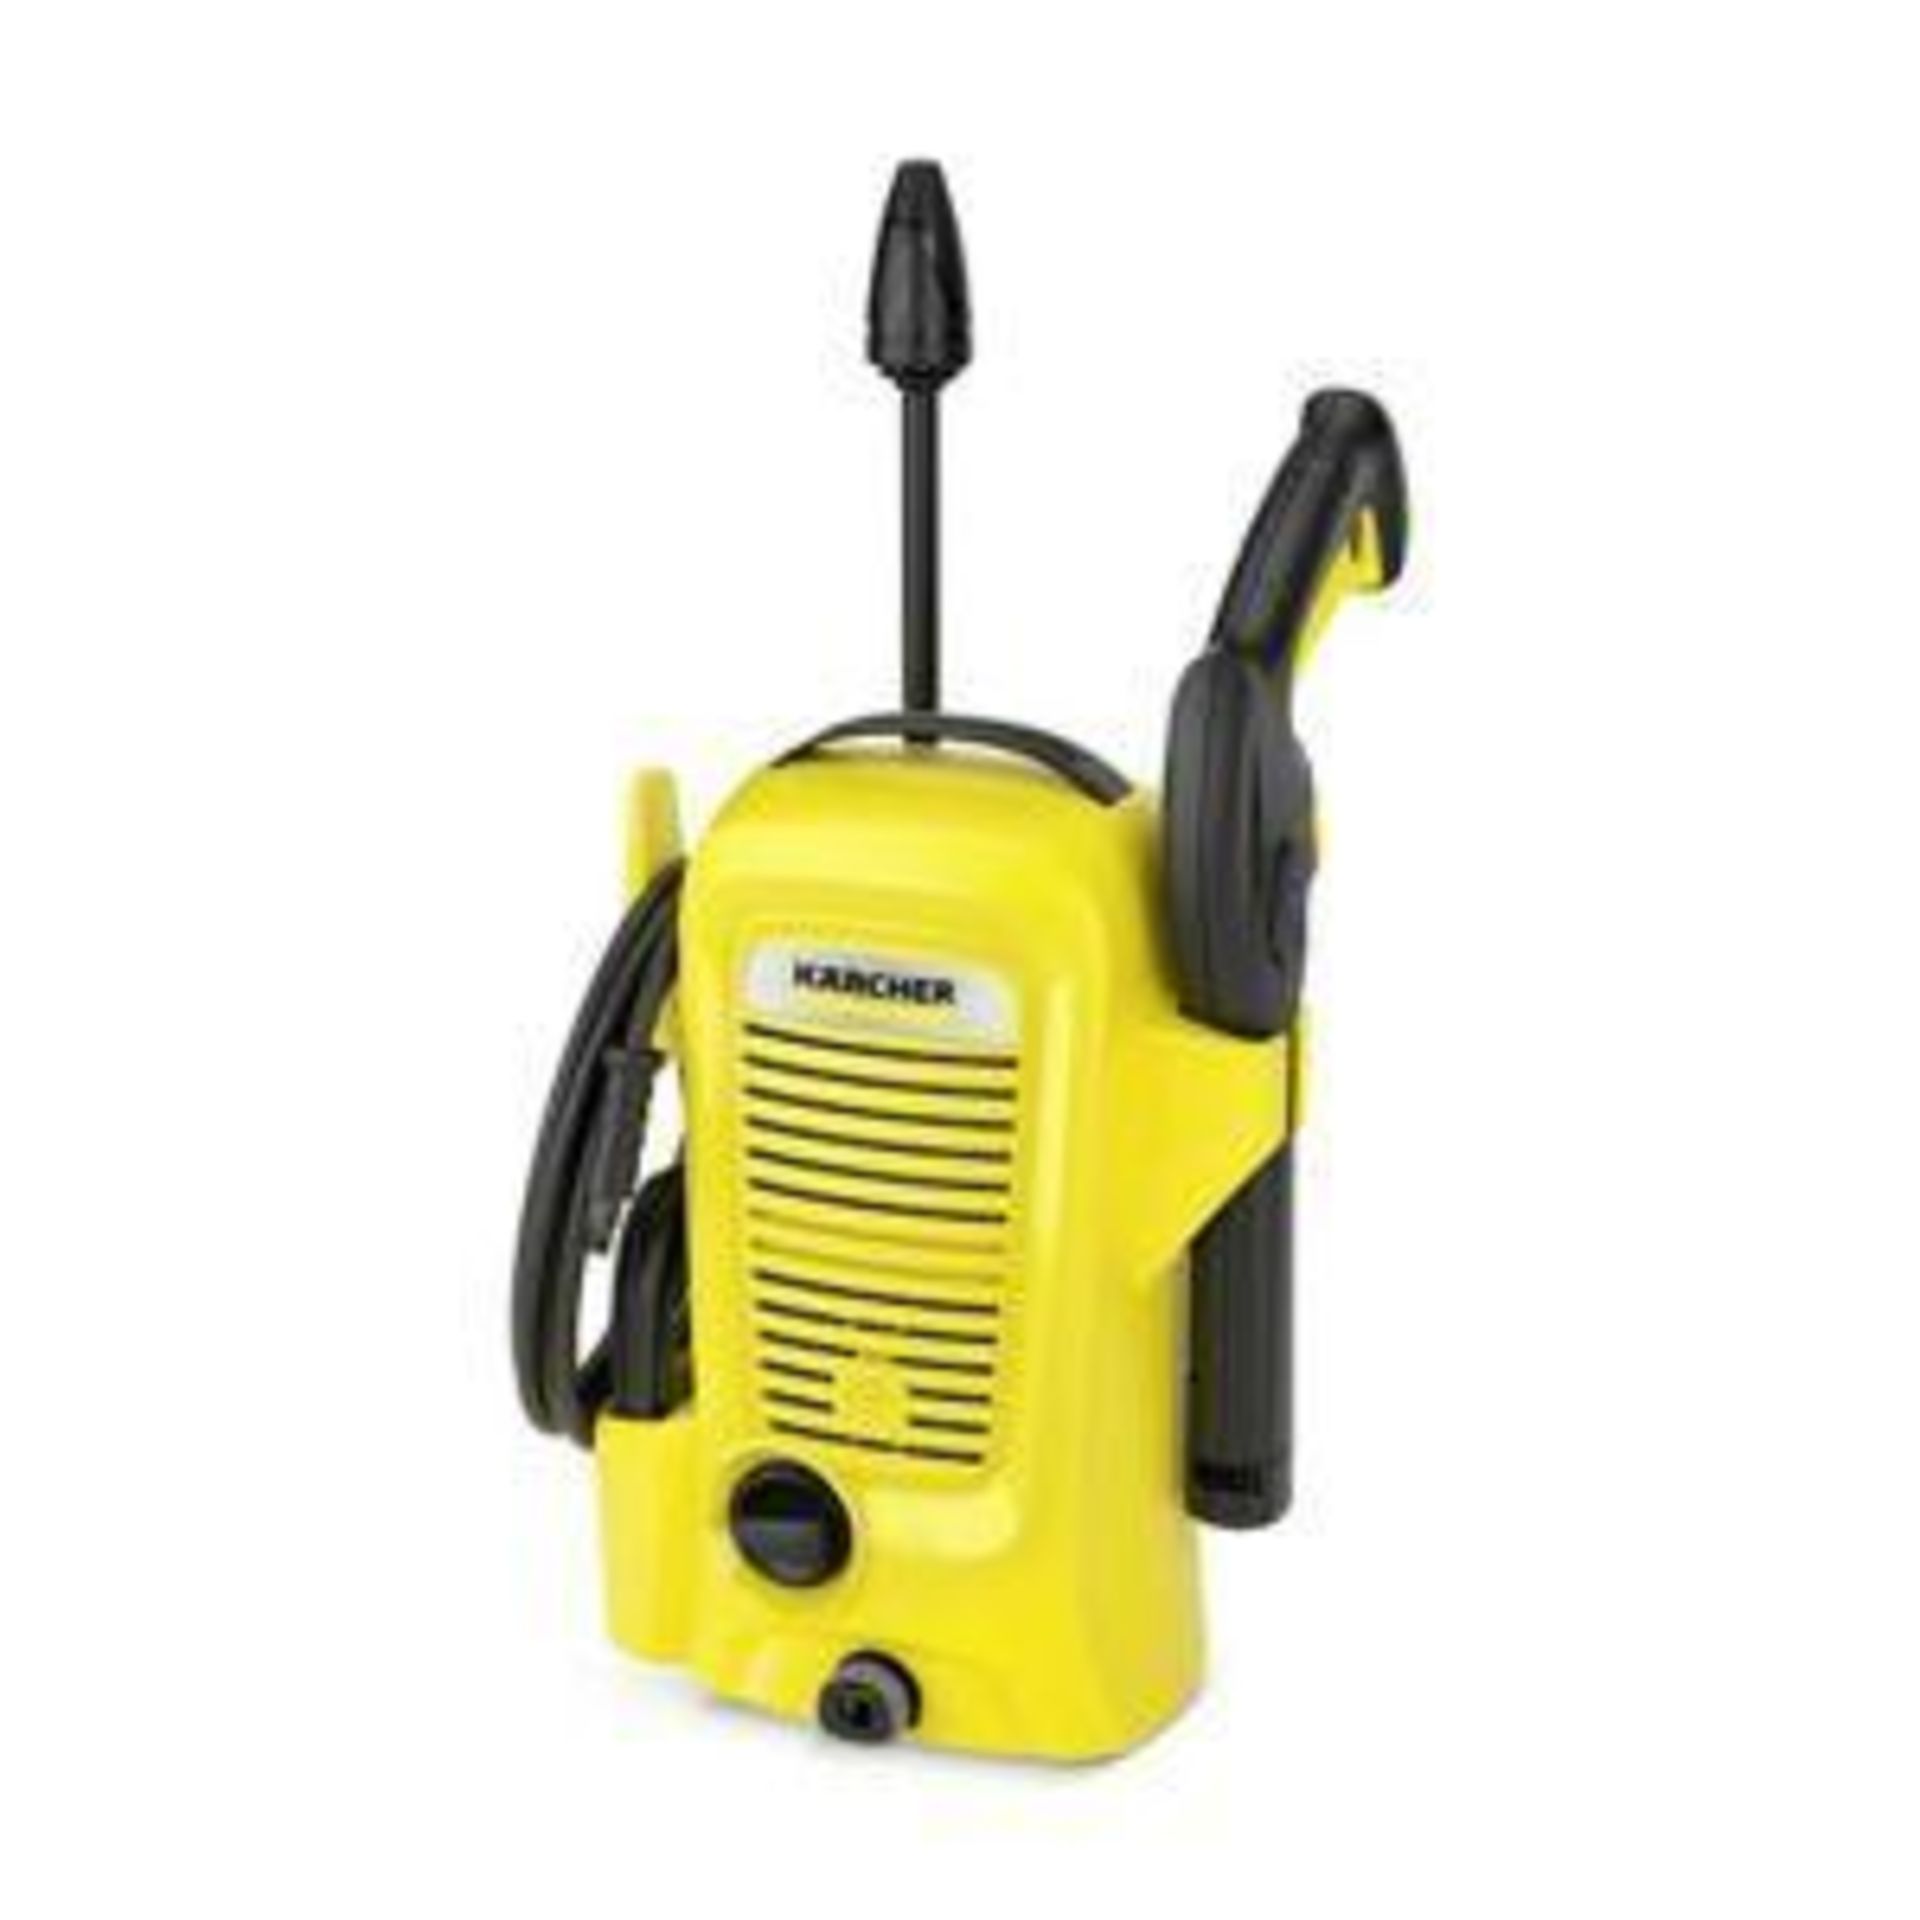 KÃ¤rcher K2 Basic Corded Pressure Washer 1.4Kw K2 - P4. Whether you want to clean dirty bicycles,